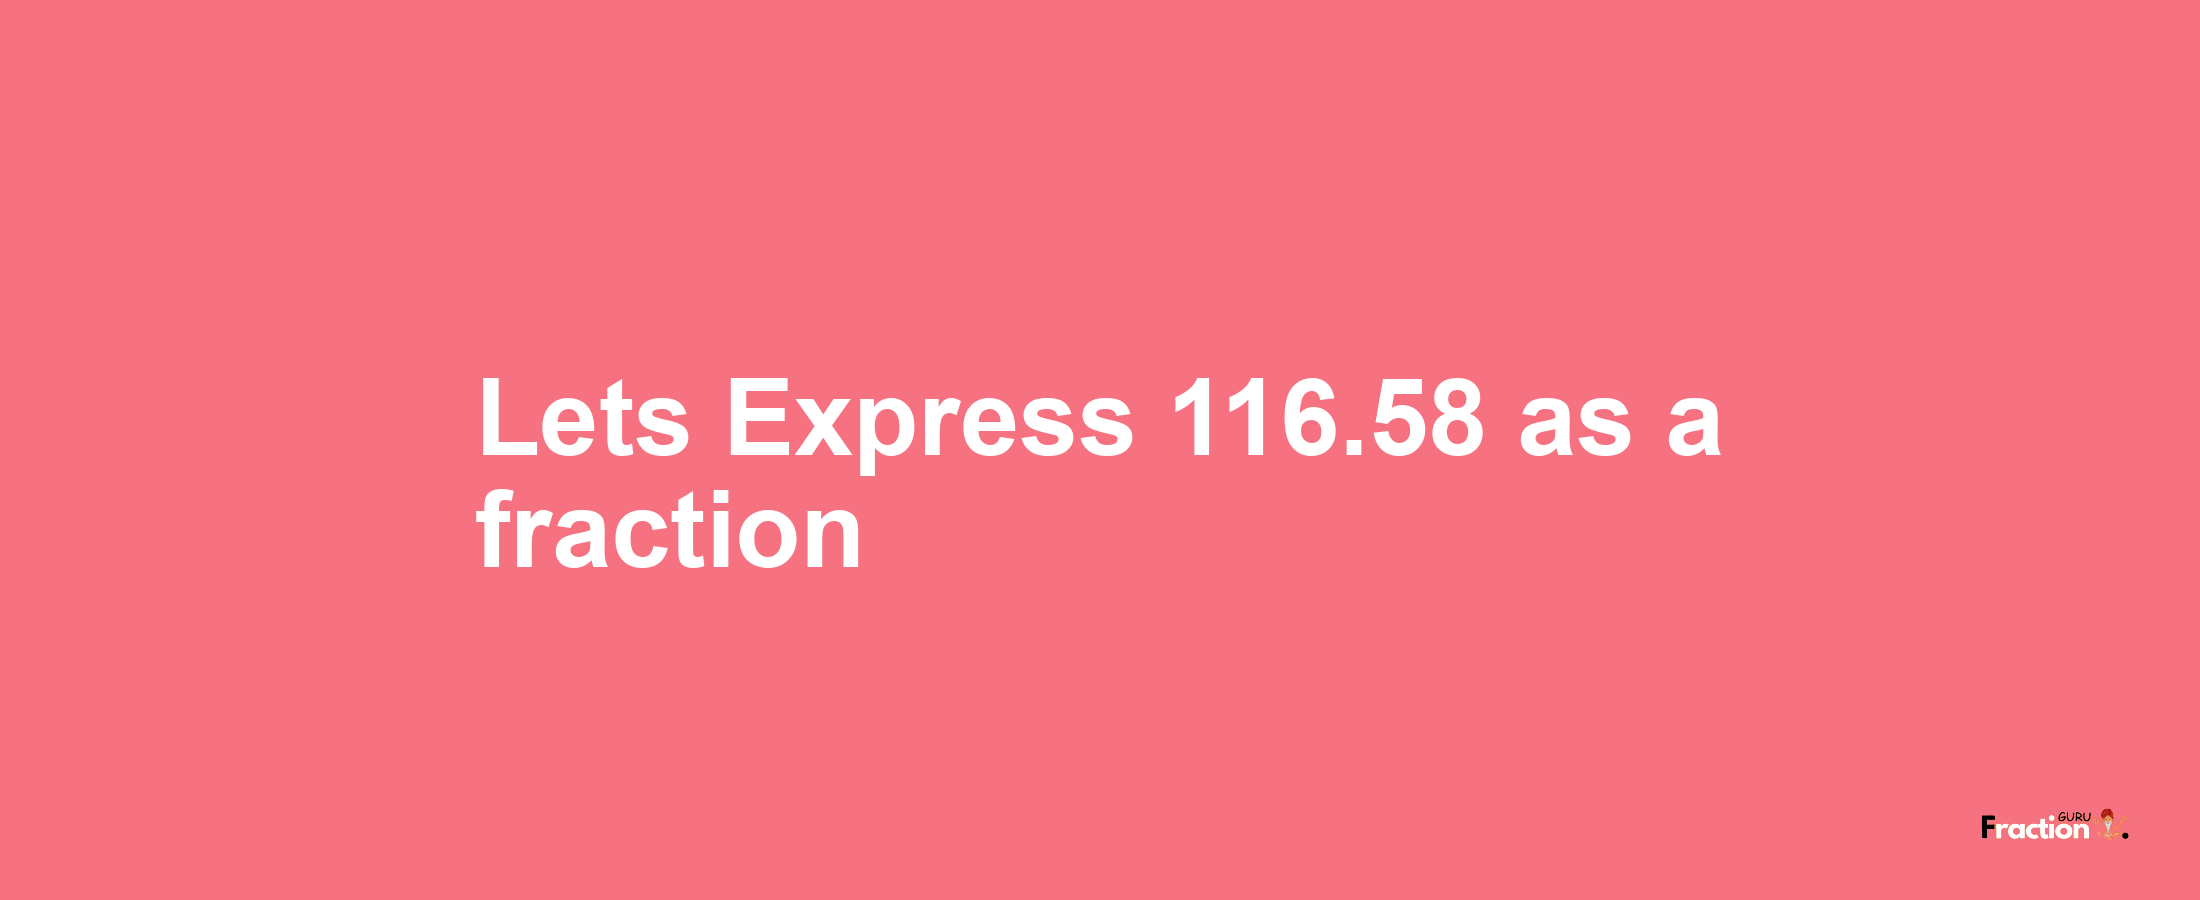 Lets Express 116.58 as afraction